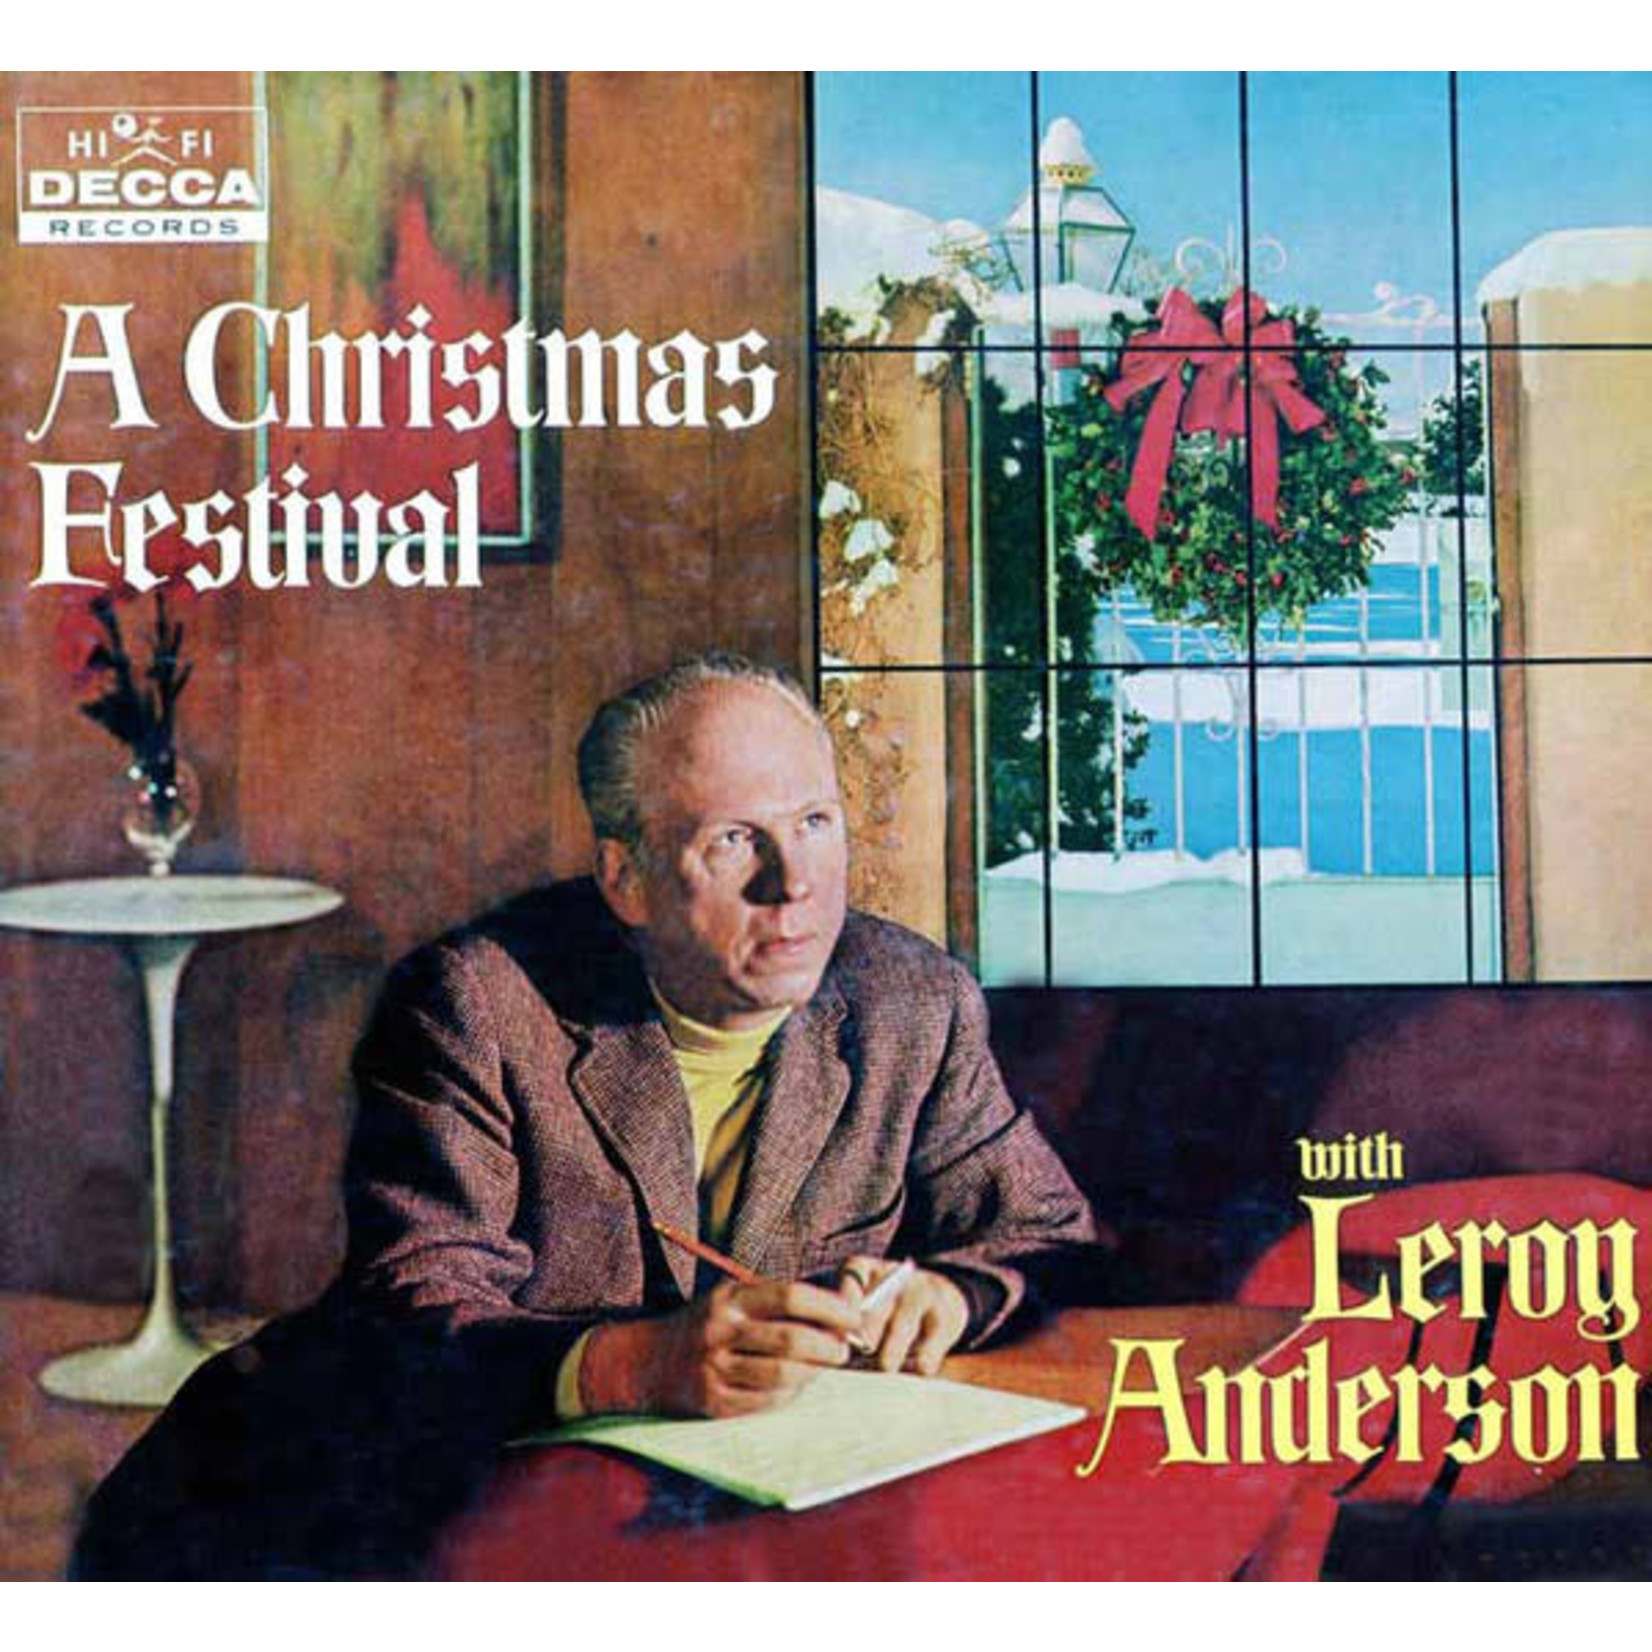 Leroy Anderson And His Orchestra – A Christmas Festival (G, 1959, LP, Decca – DL 8925, Canada)